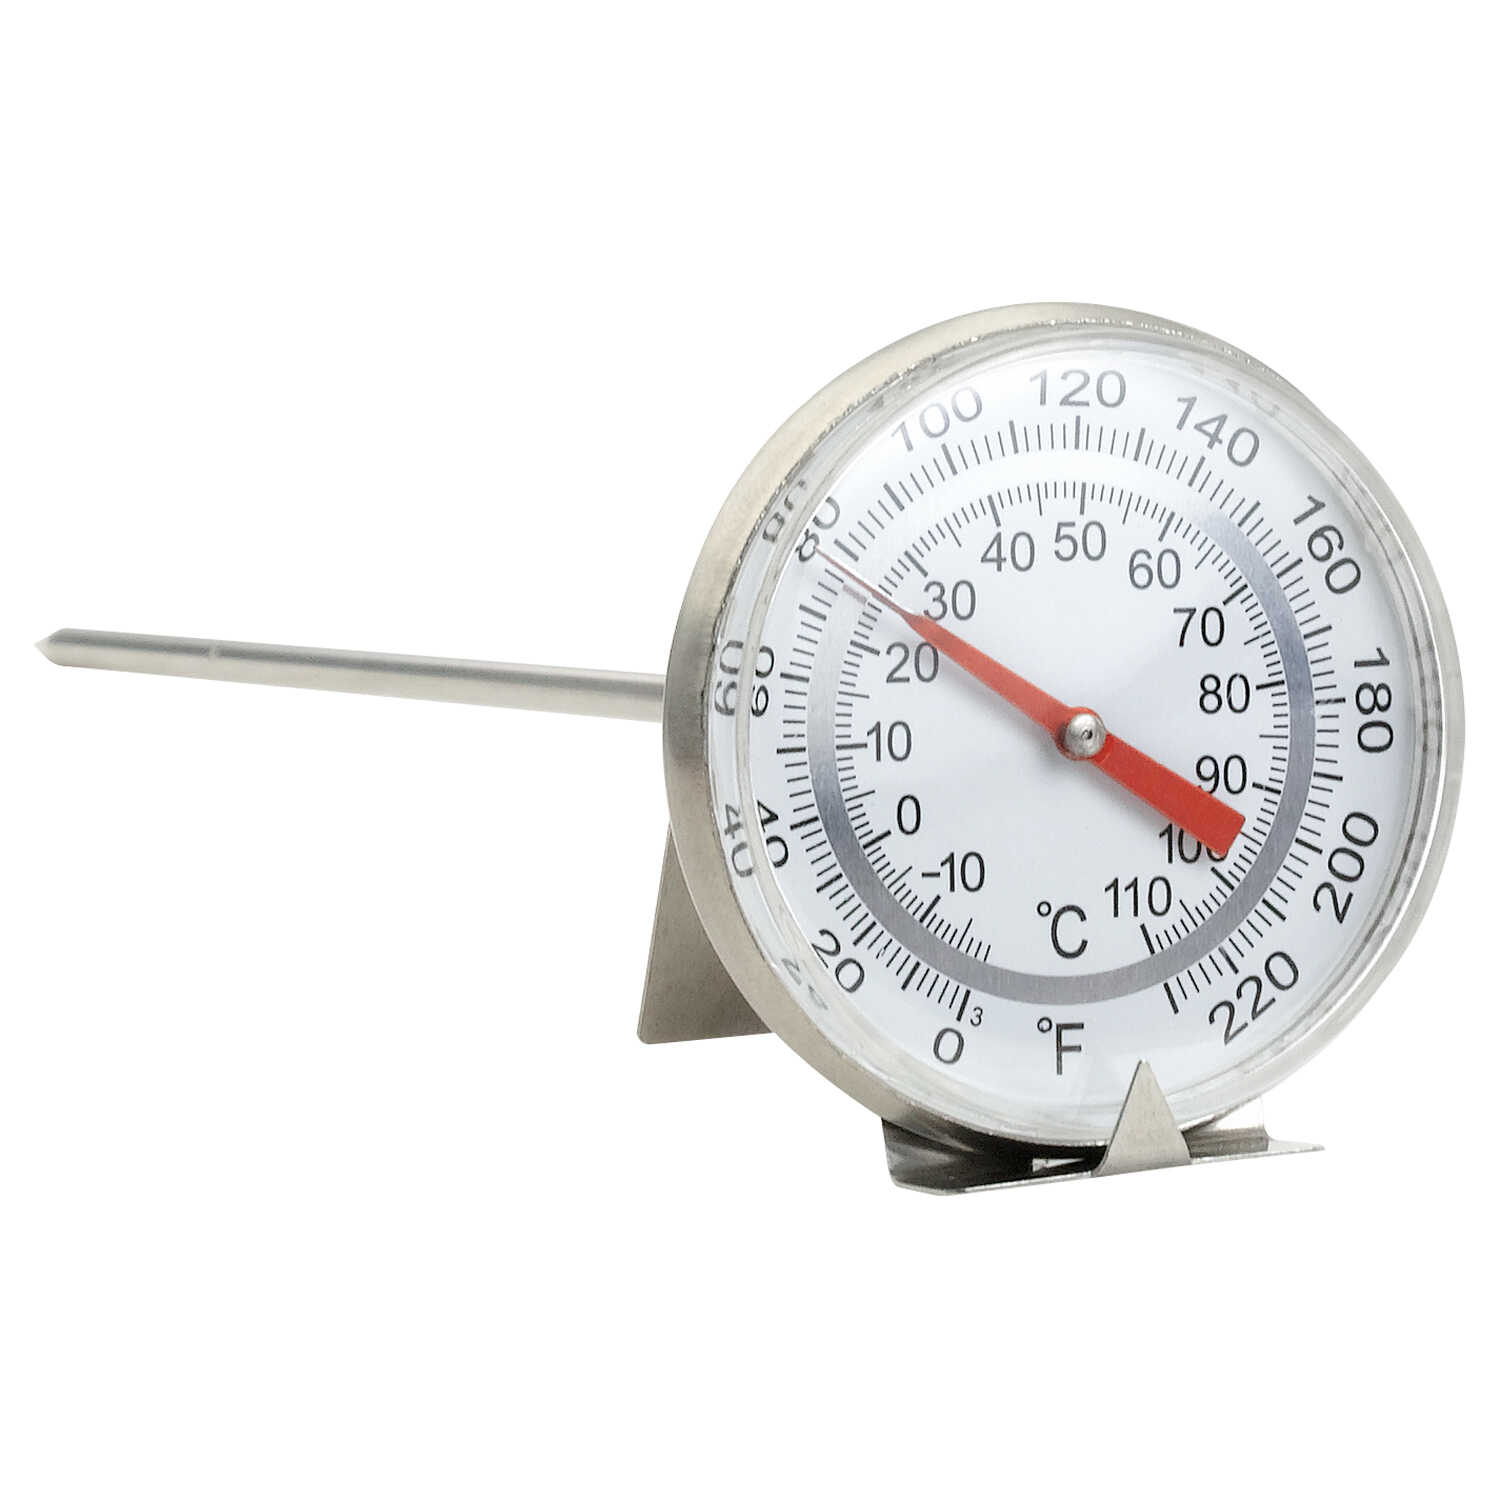 Details about   Stainless Steel Soil Thermometer 127mm Stem Display 0-100 Degrees Celsius RIHLI 